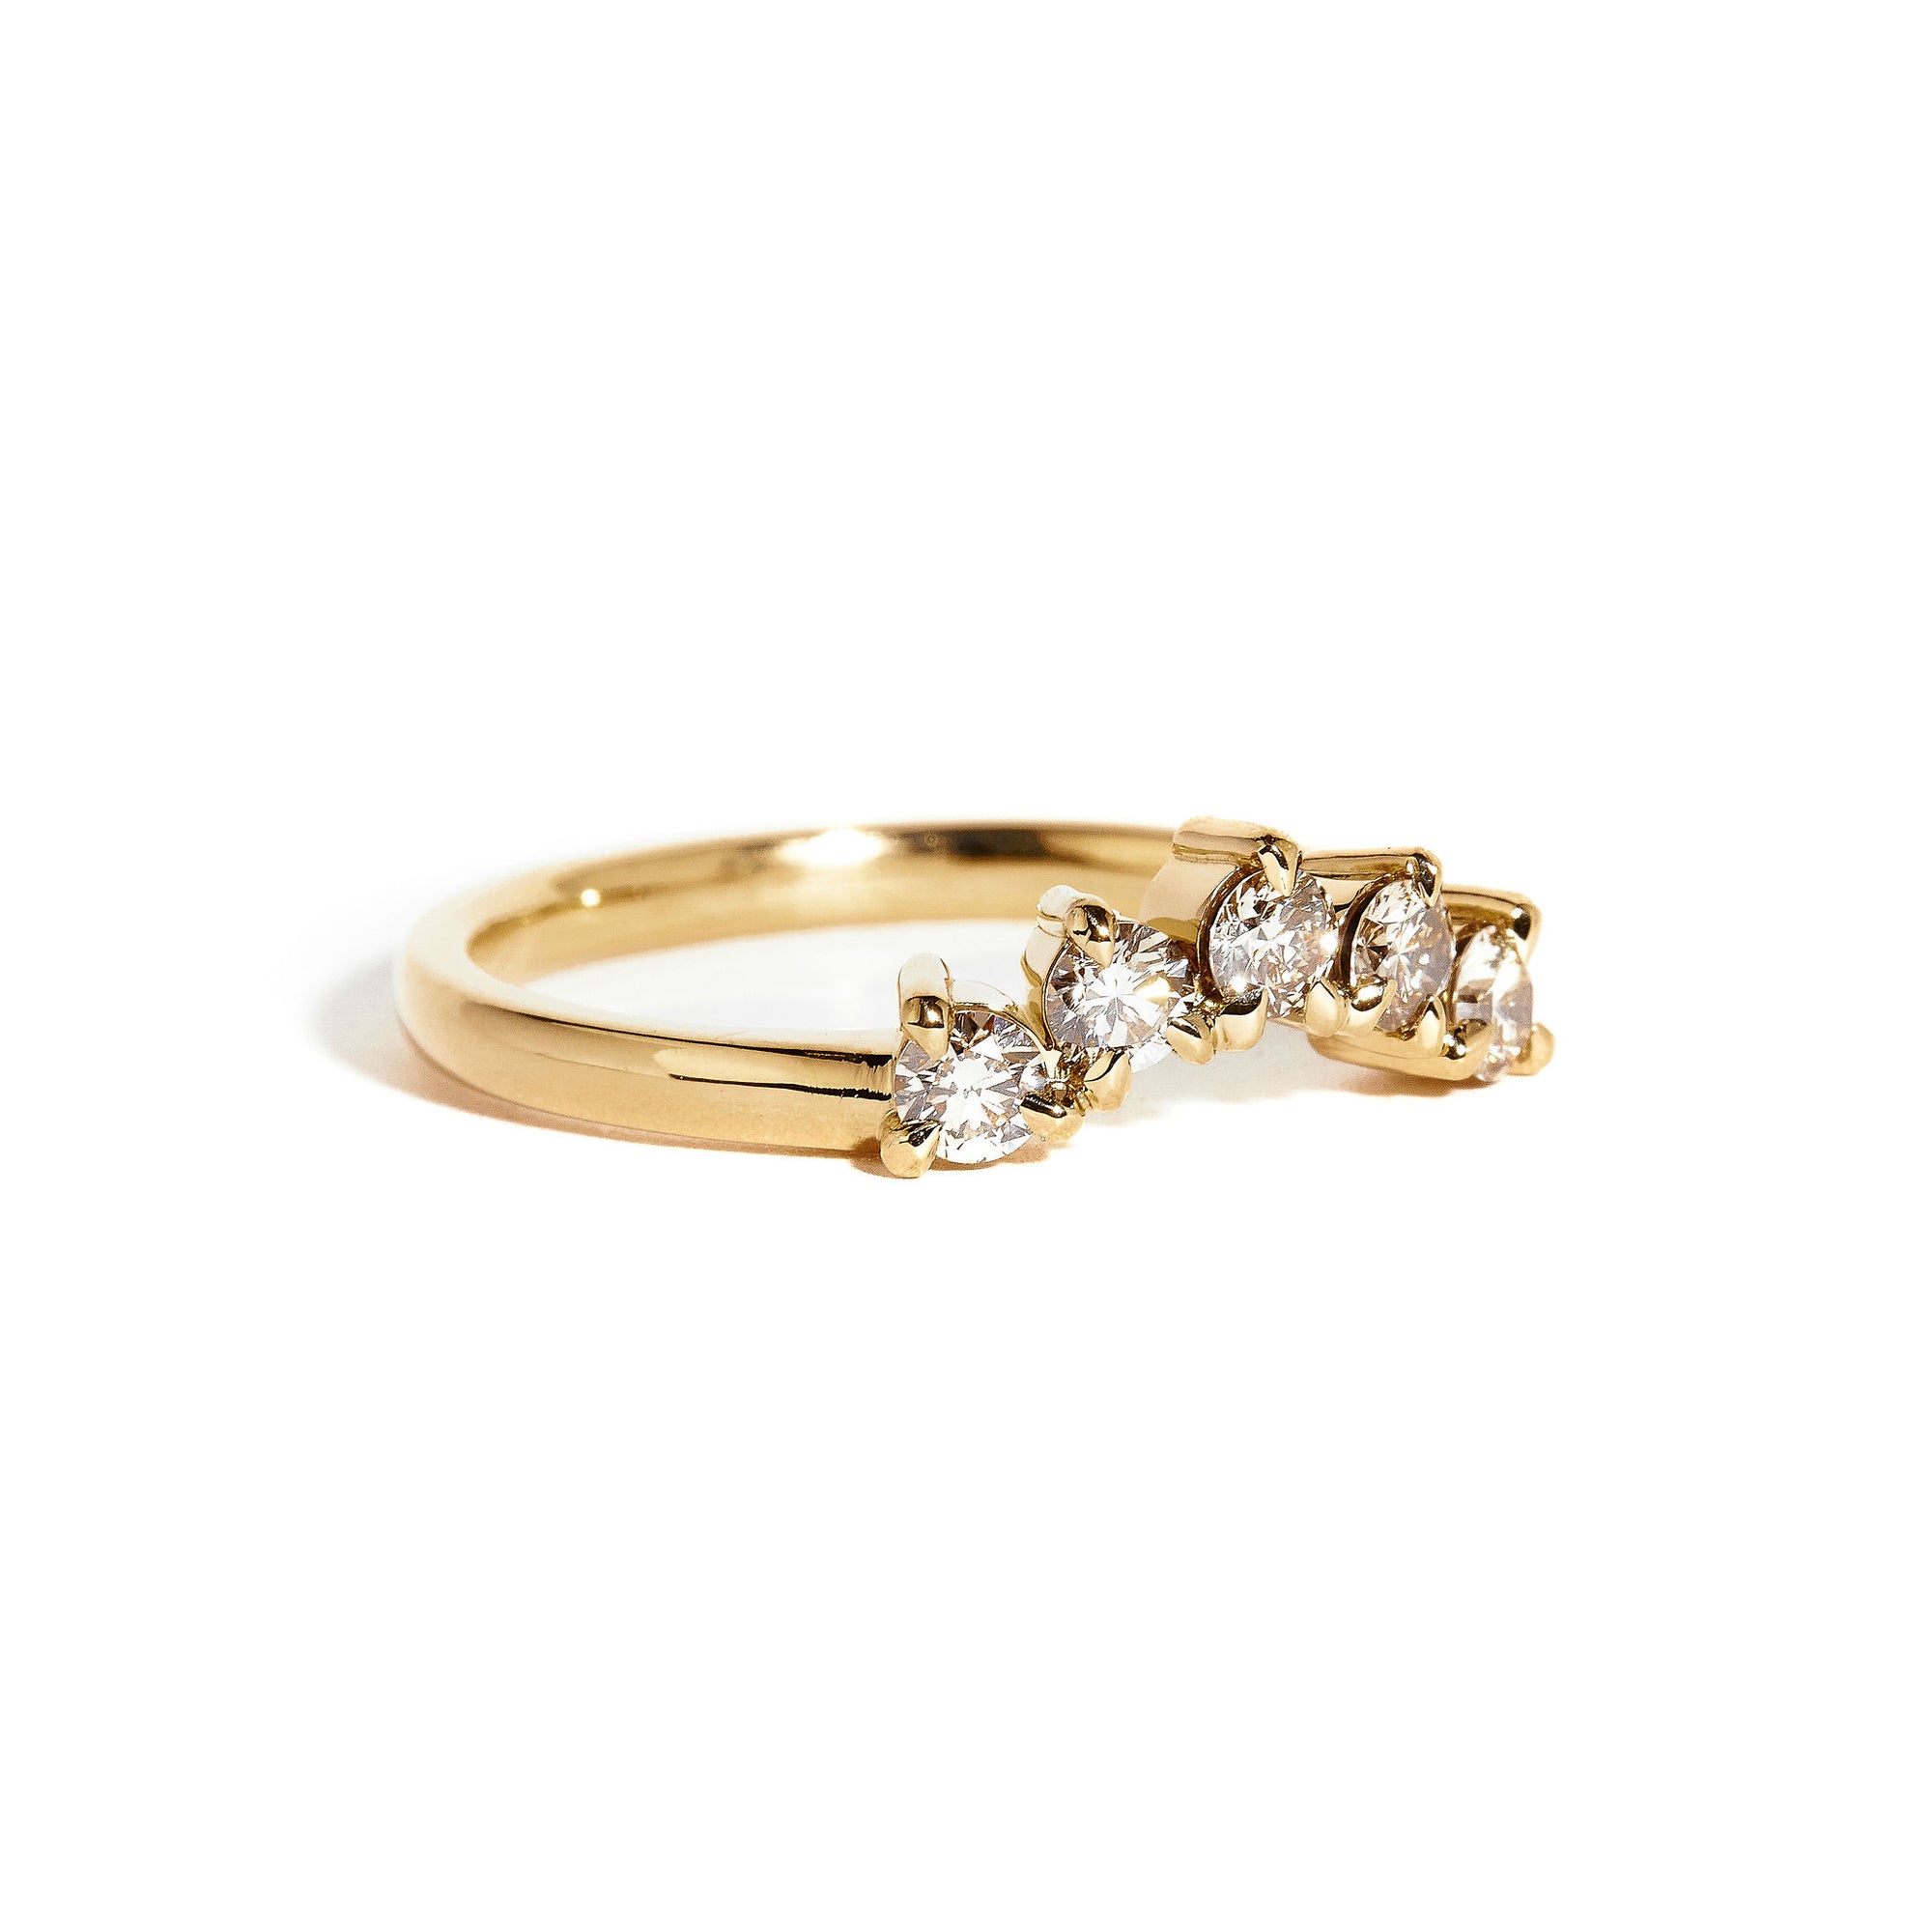 18 carat yellow gold woman's wedding band with 5 round champagne diamonds, claw set in a slight curve.